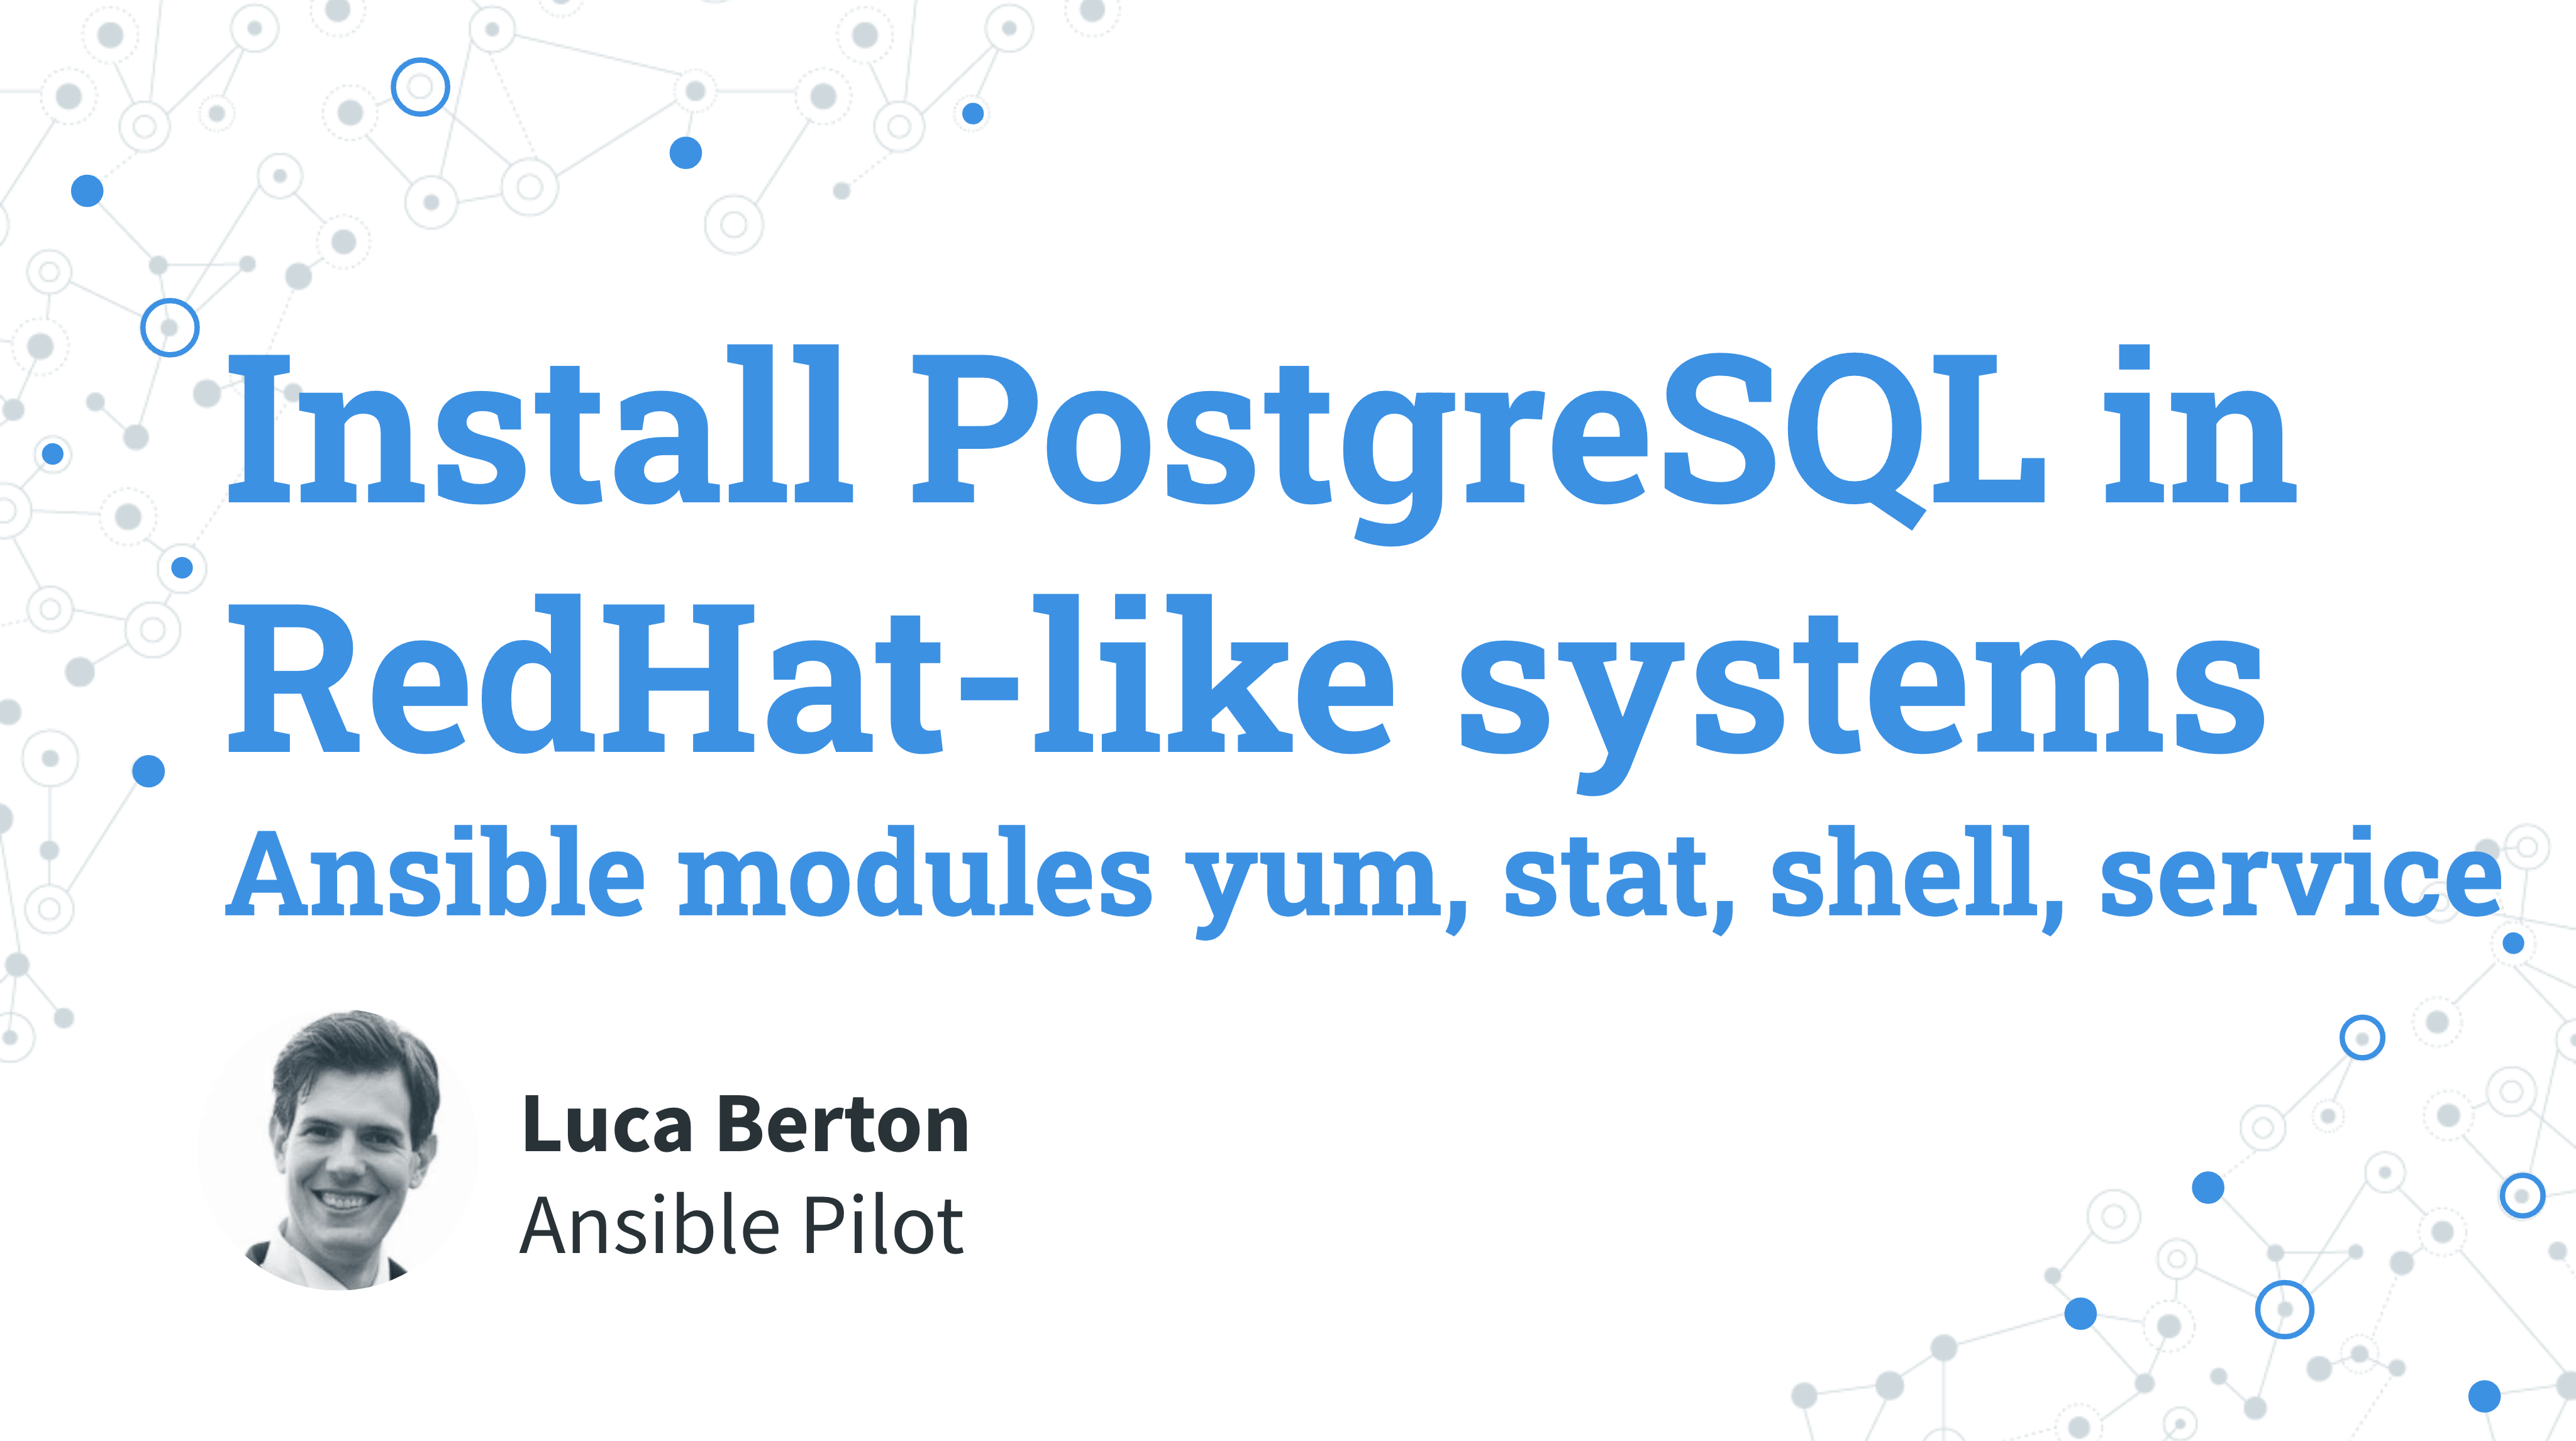 Install PostgreSQL in RedHat-like systems - Ansible modules yum, stat, shell, service